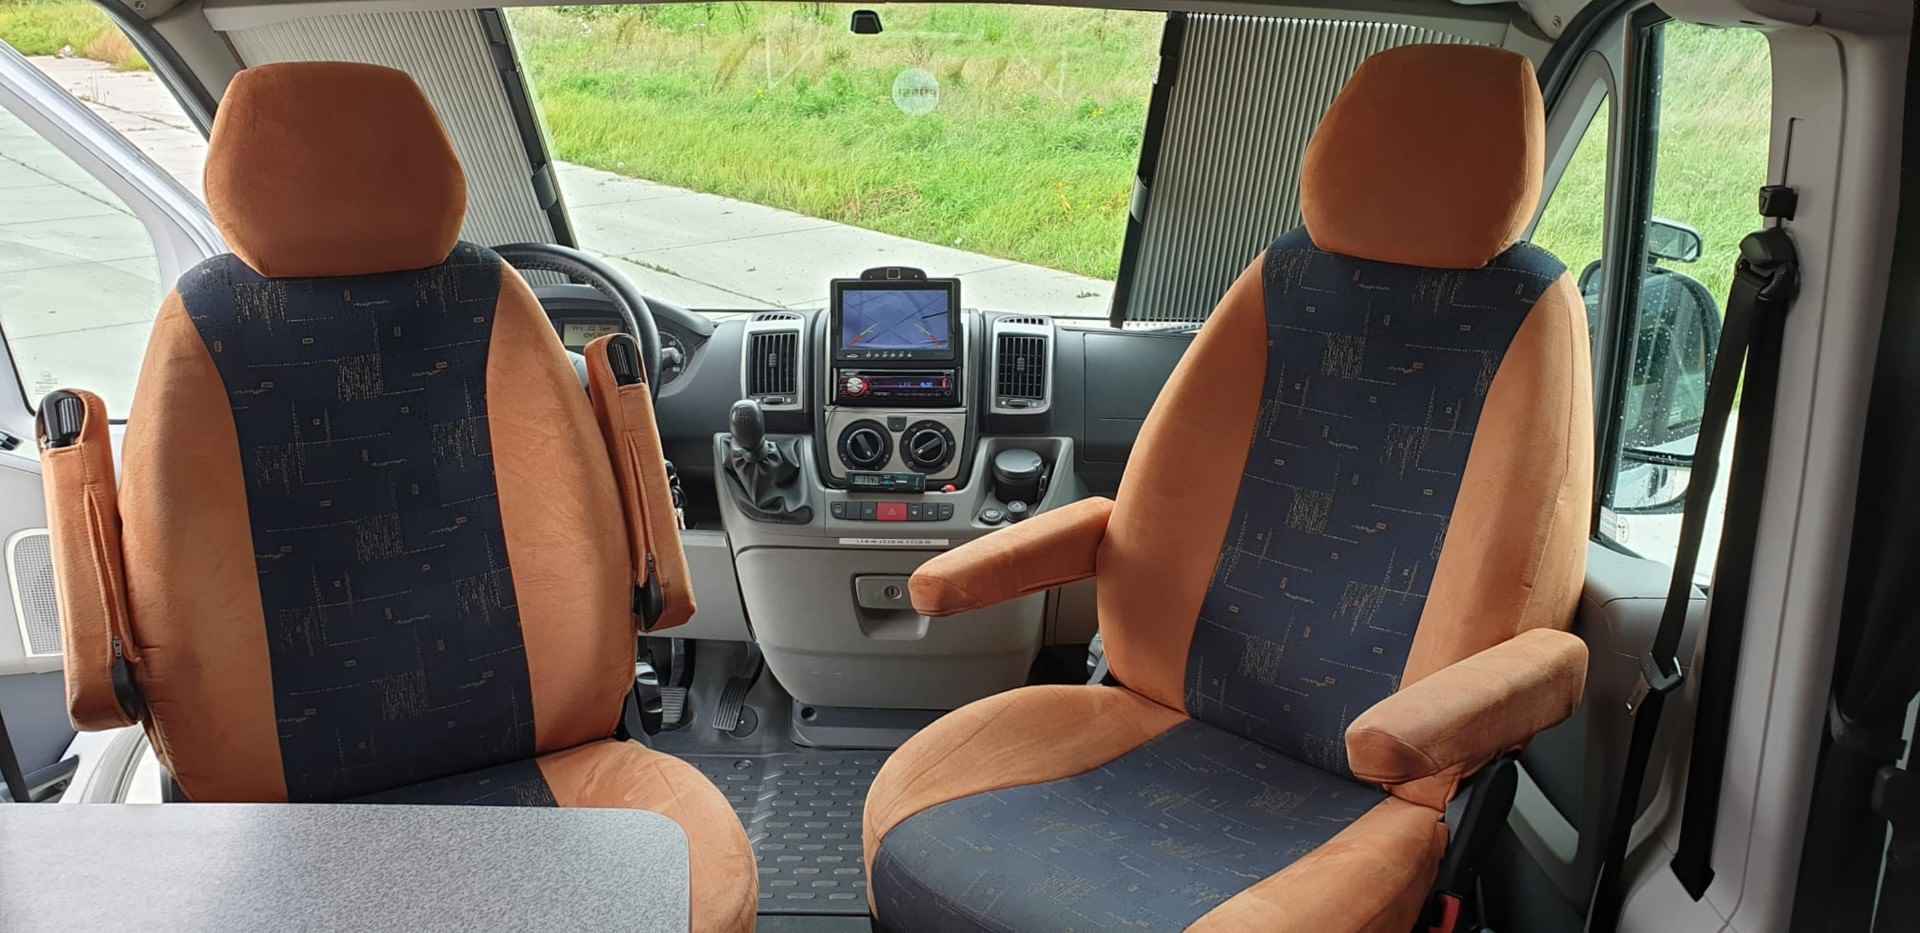 Possl 2win Bus camper - Airco - Lucht vering - 6/16